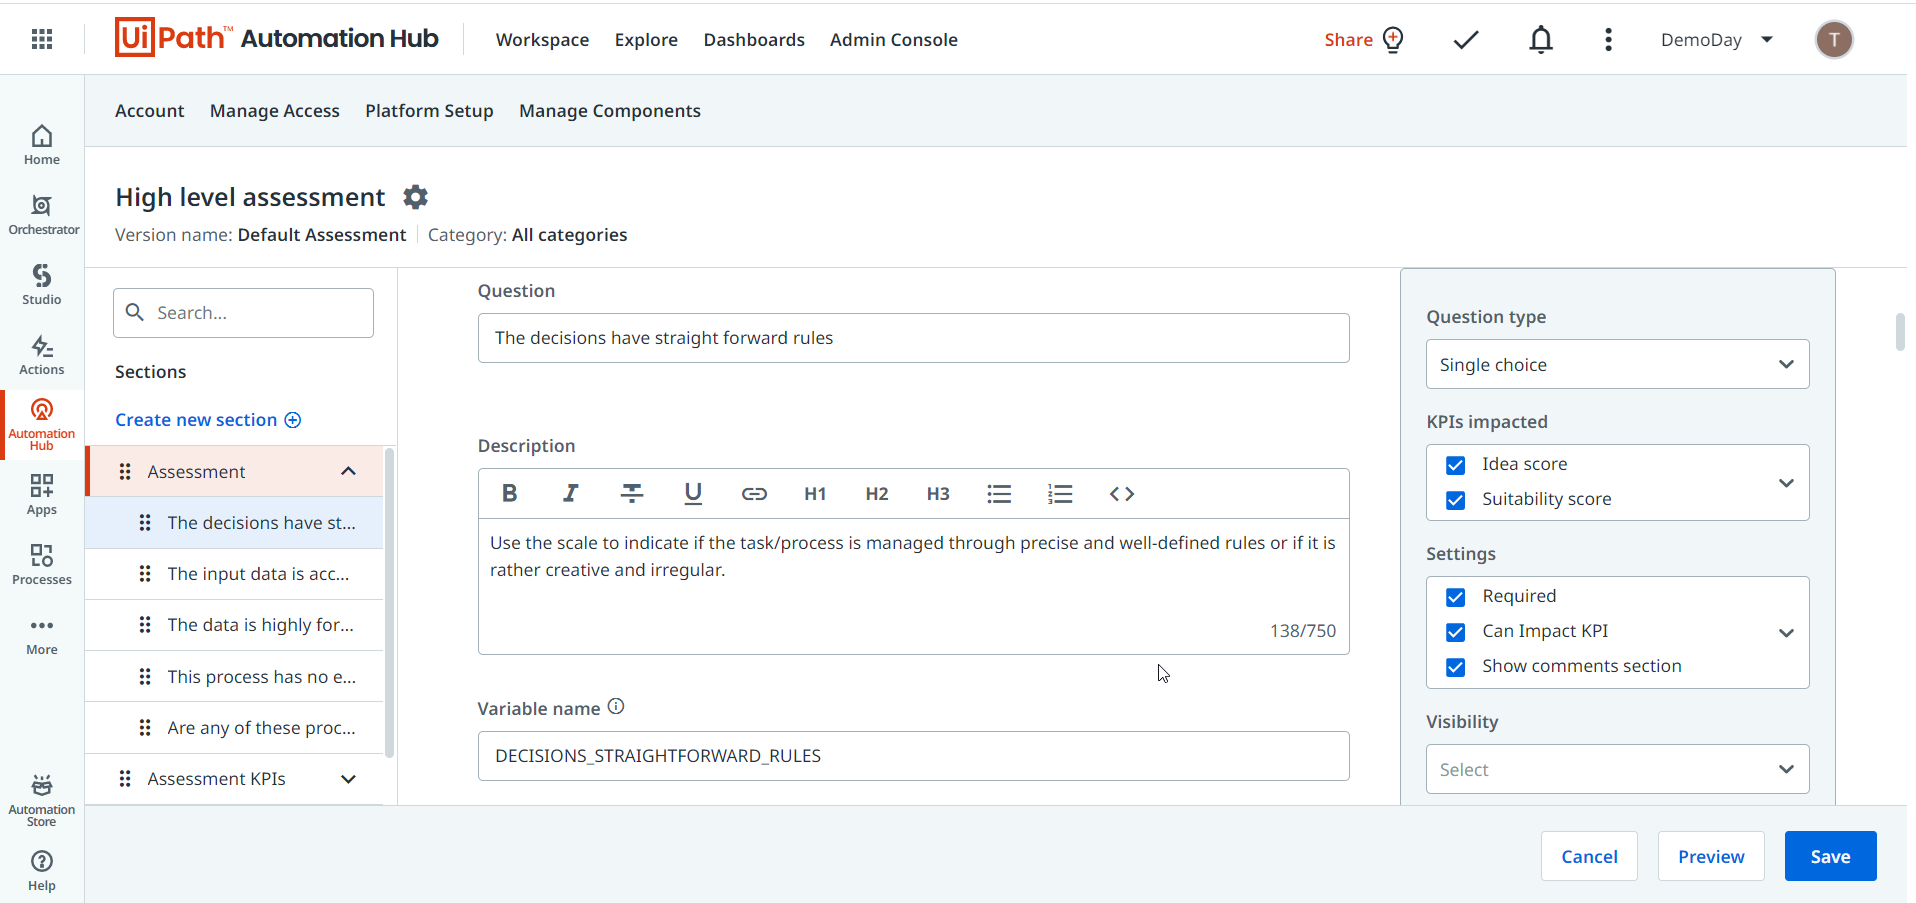 uipath automation hub new assessment customization experience march 2022